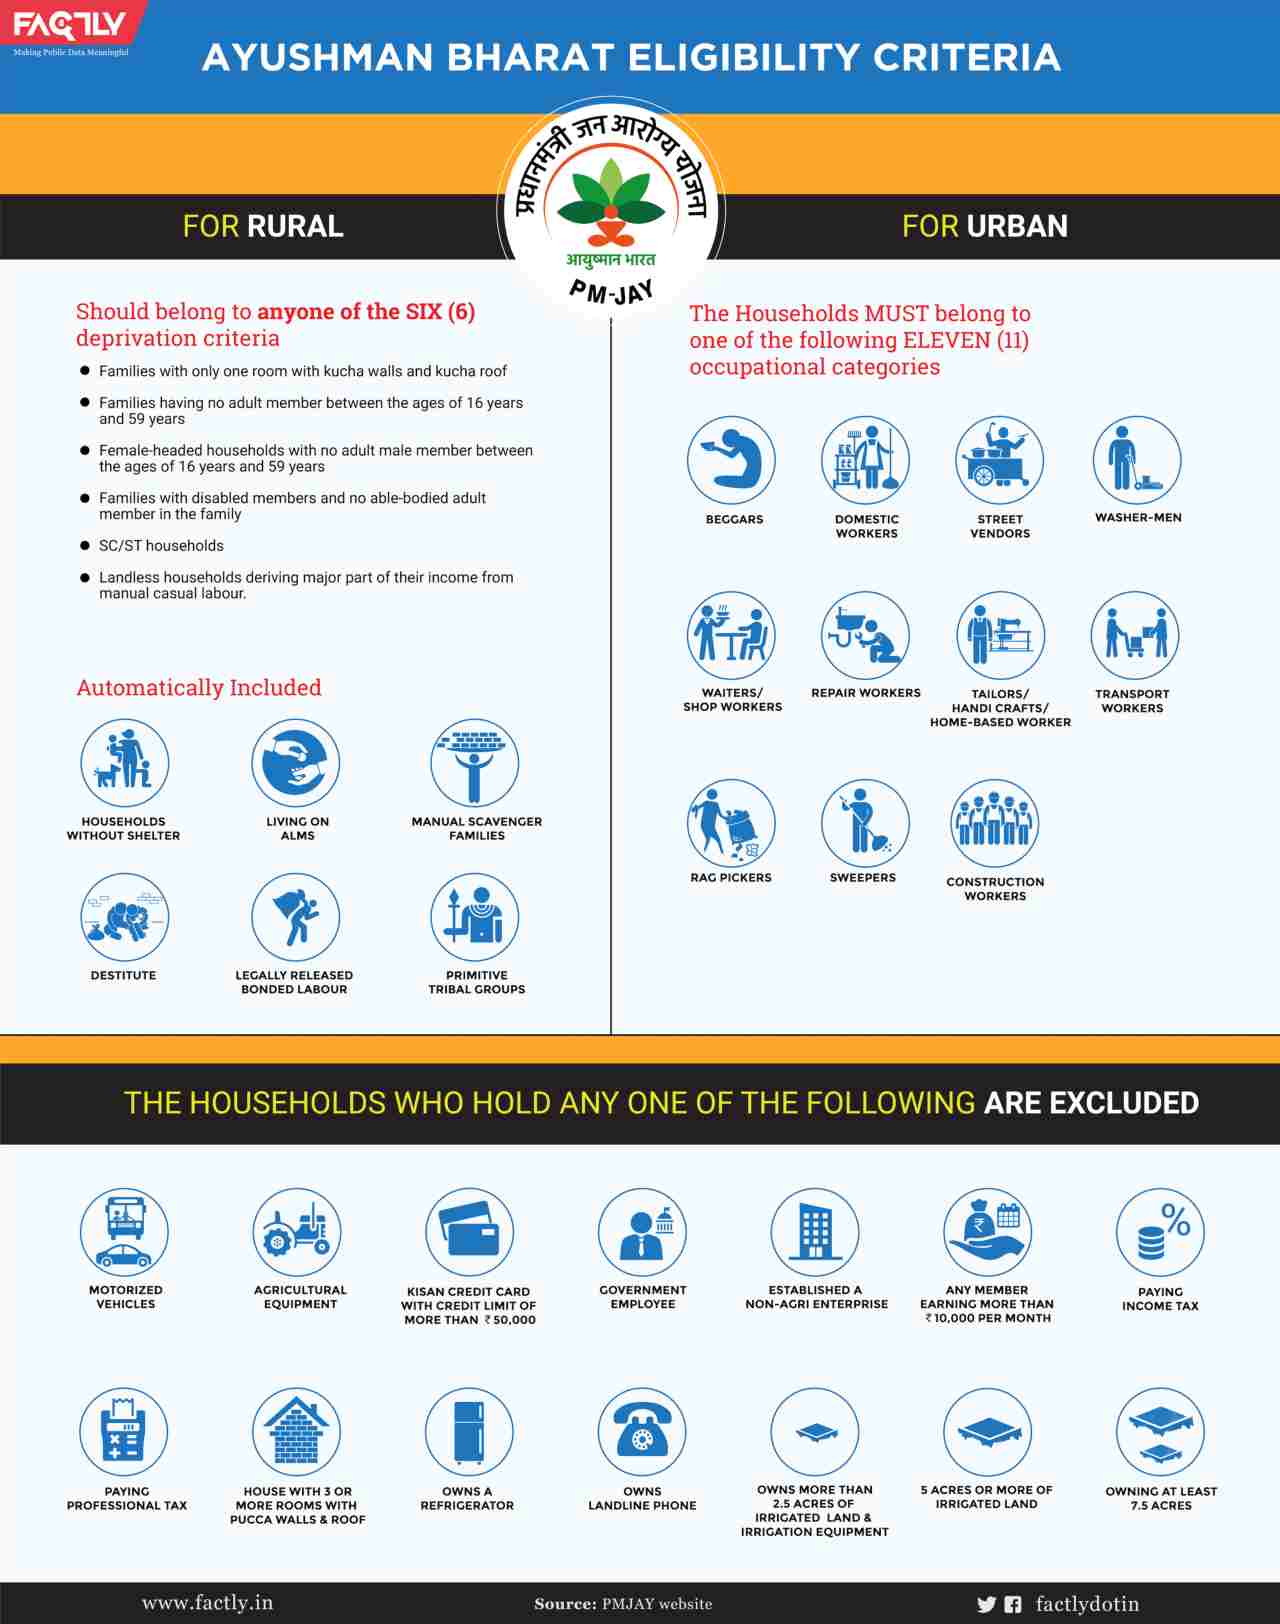 An eligibility chart for the Ayushman Bharath program via Factly.in